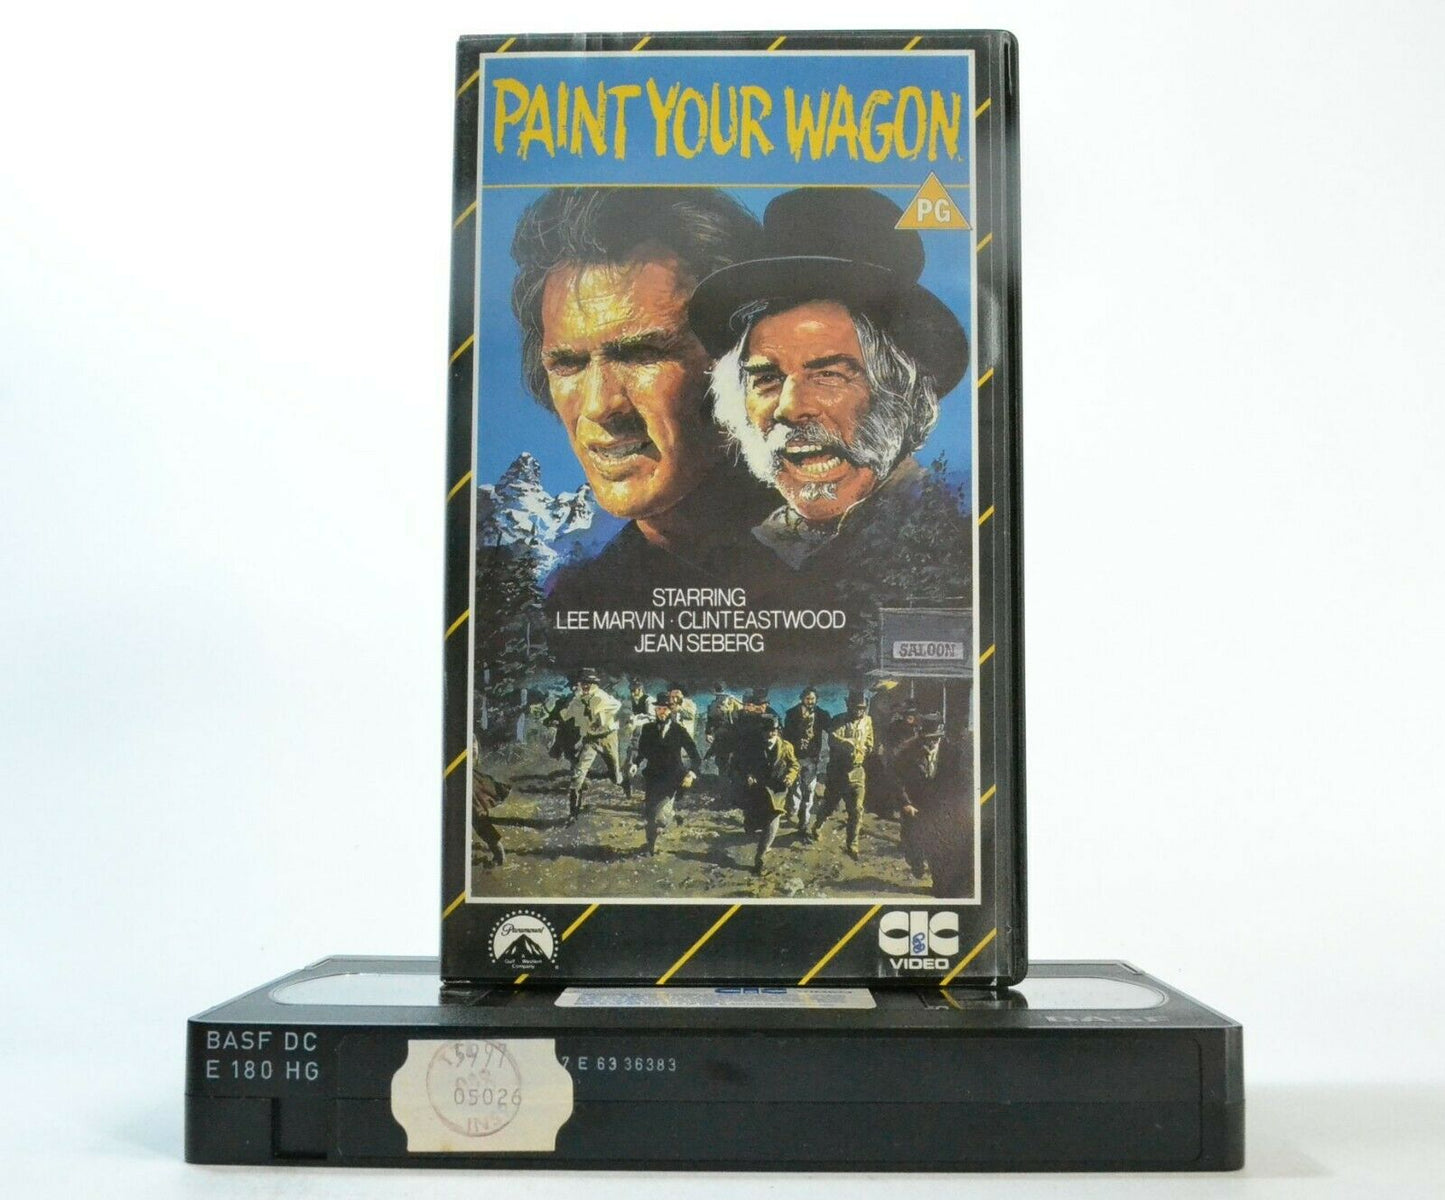 Paint Your Wagon: (1971) CIC Video - Western - Lee Marvin/Clint Eastwood - VHS-